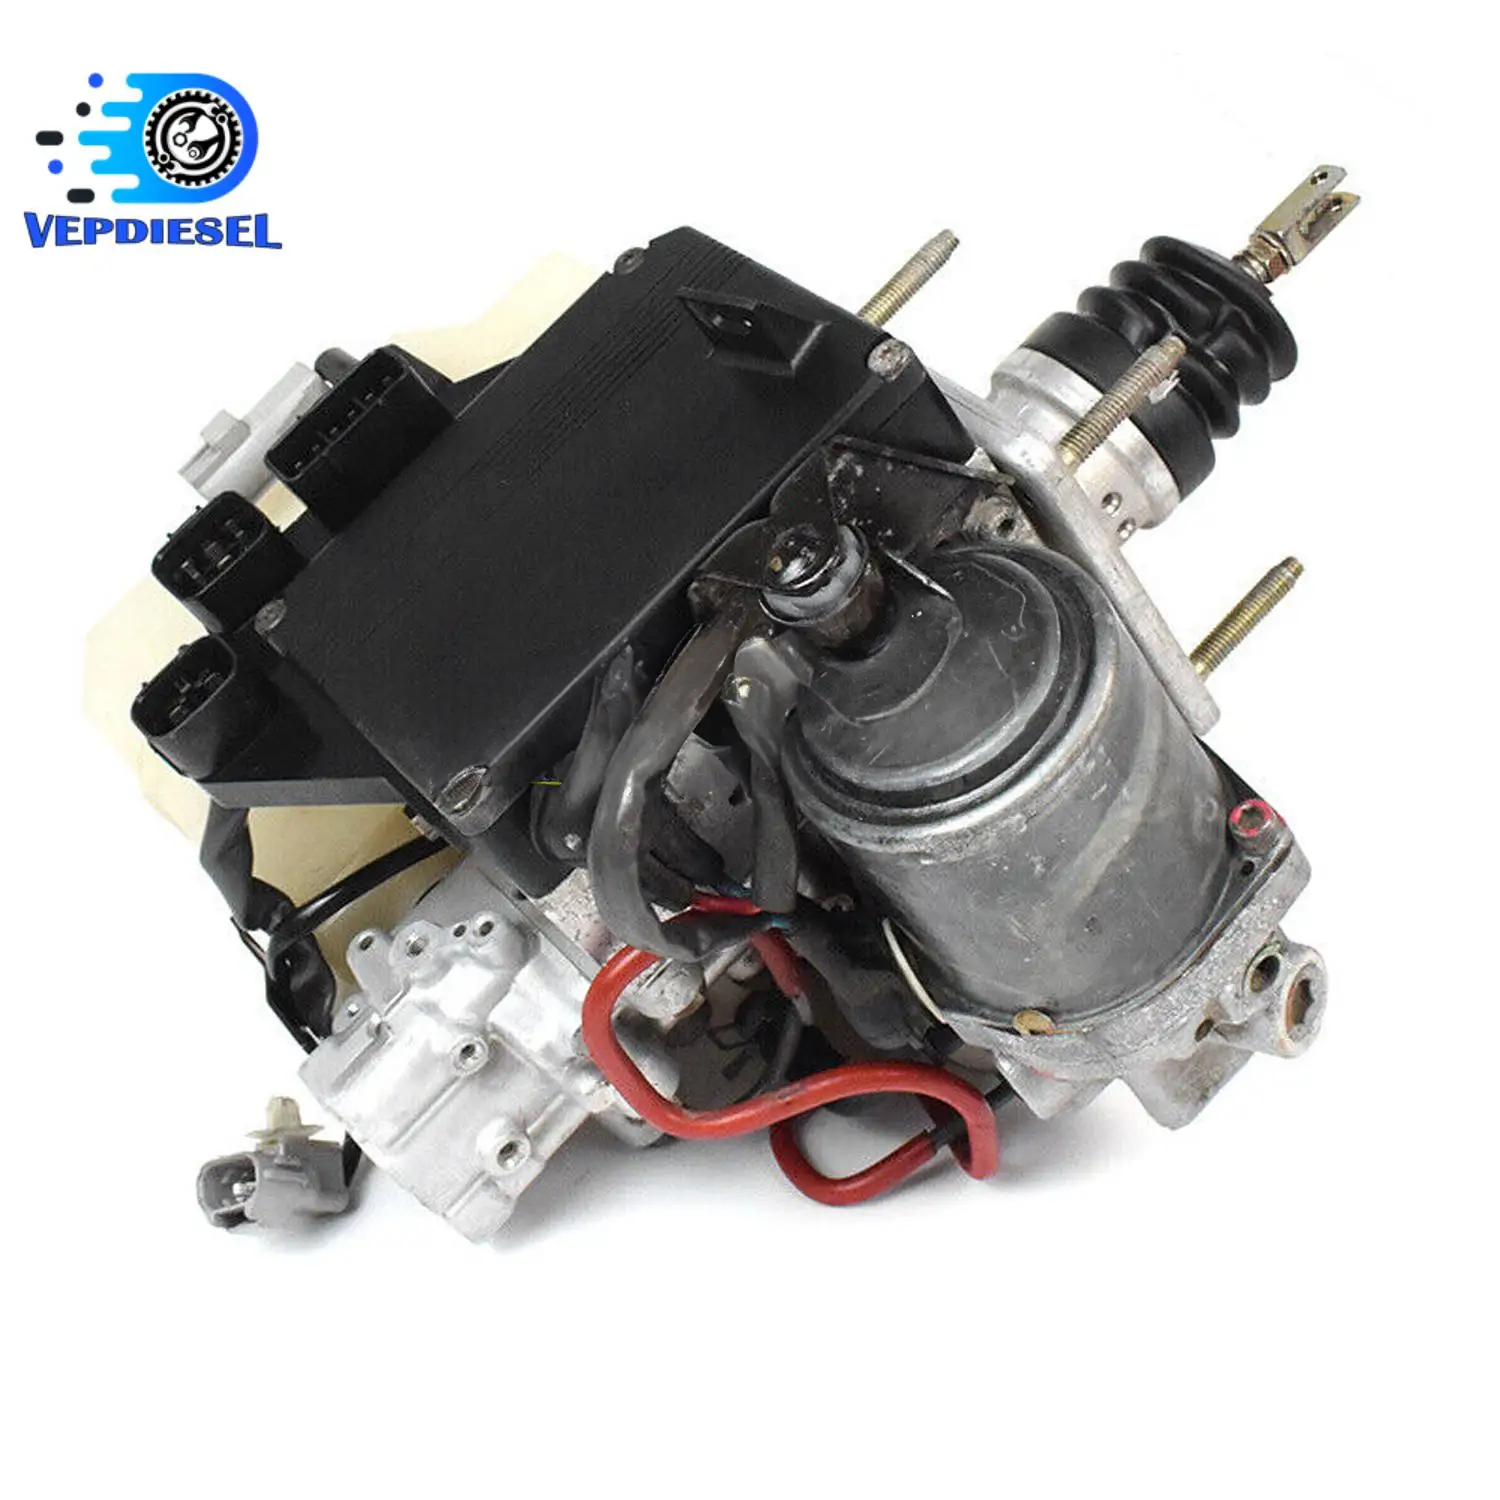 

1PC ABS Pump Master Cylinder Booster Actuator For 98-99 TOYOTA LAND CRUISER LX470 47050-60010 Refurbished with 1 Years Warranty